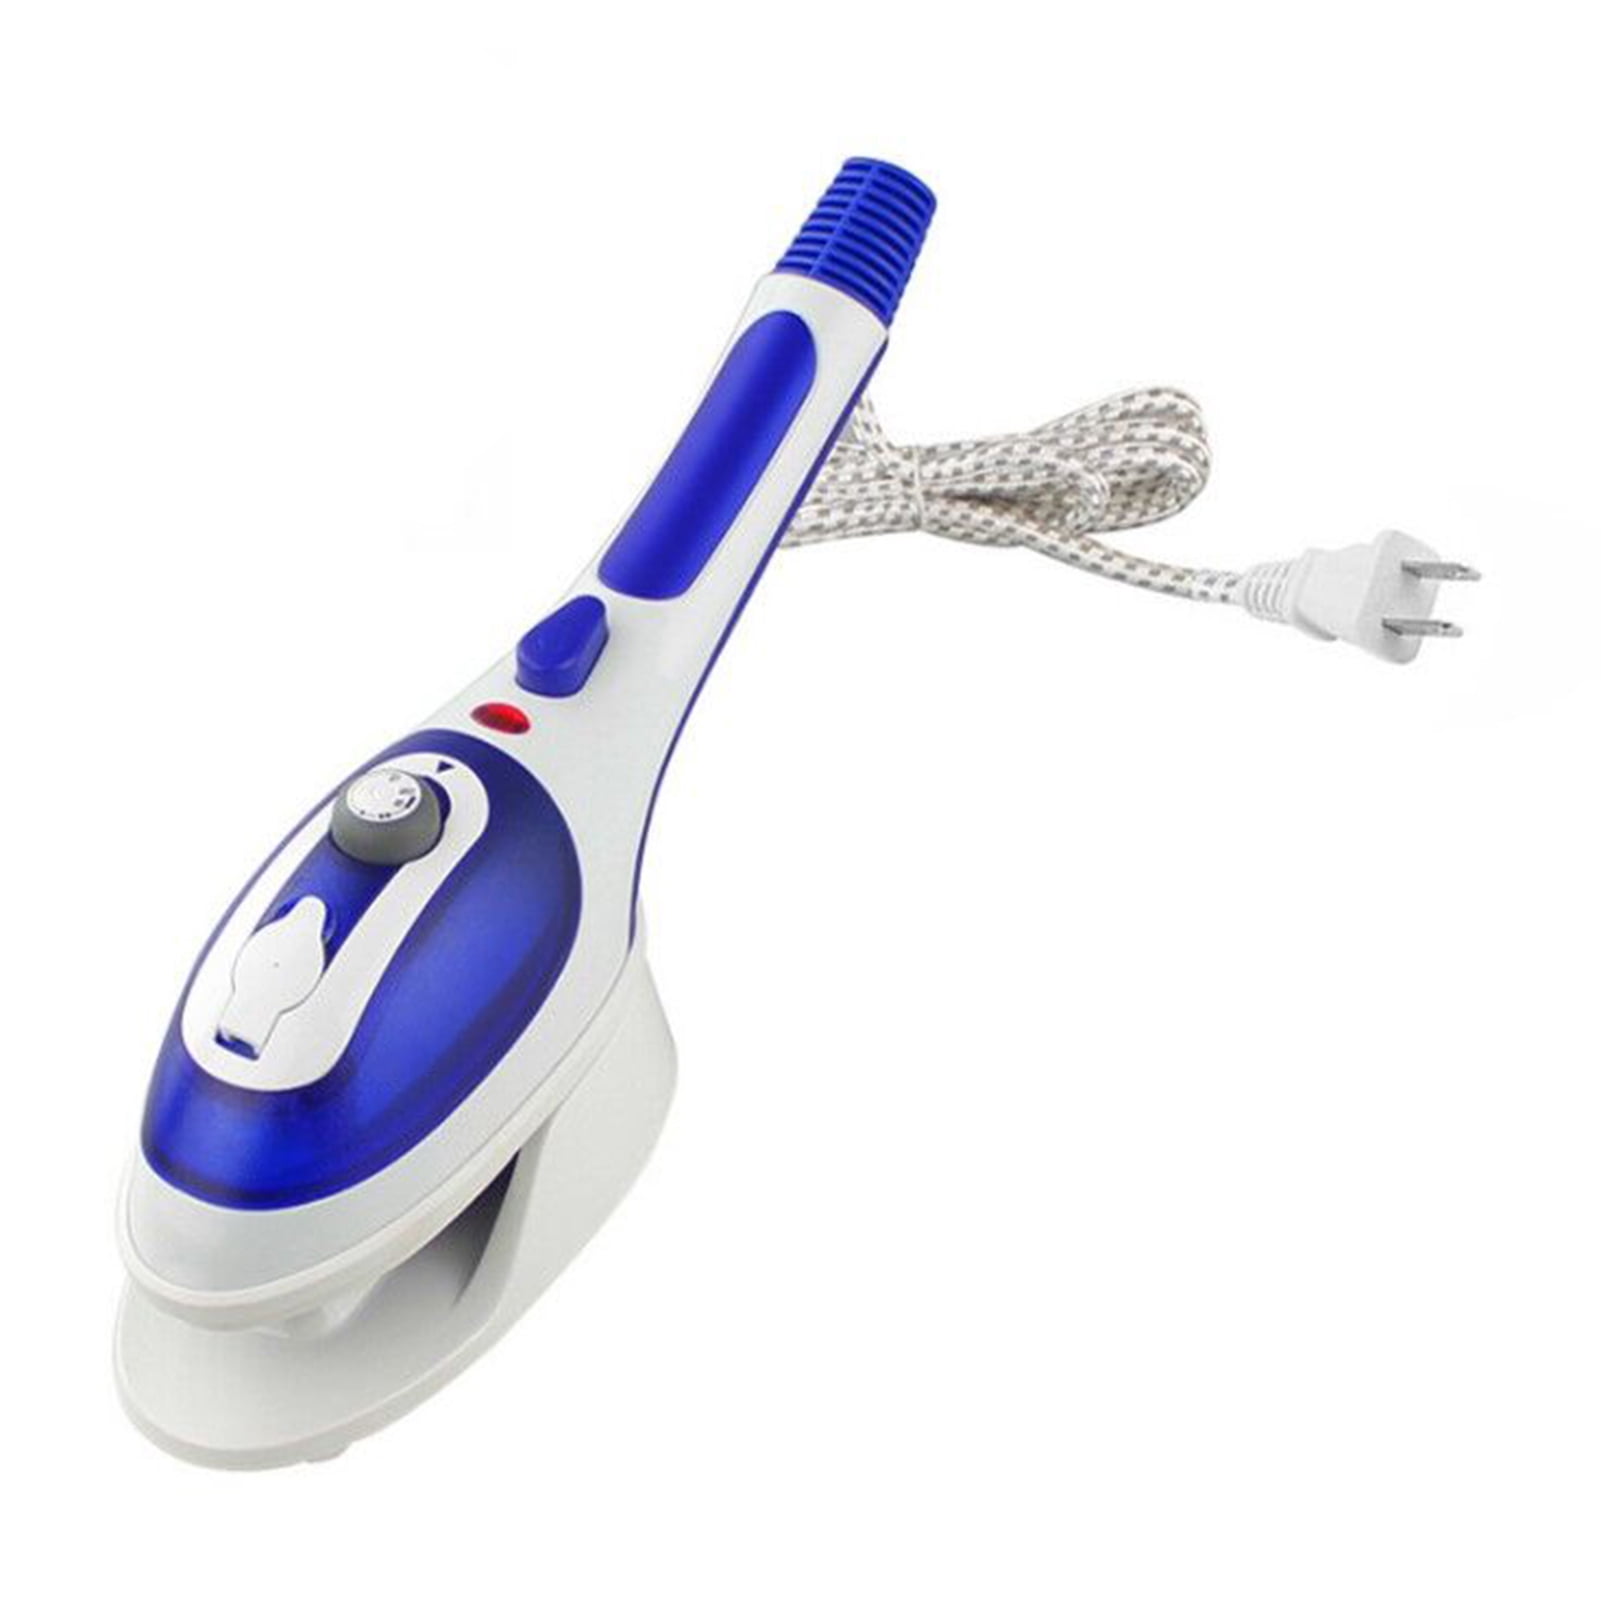 Details about   Clothes Garment Fabric Steamer Wrinkle Remove Home Travel Portable Mini Handheld 